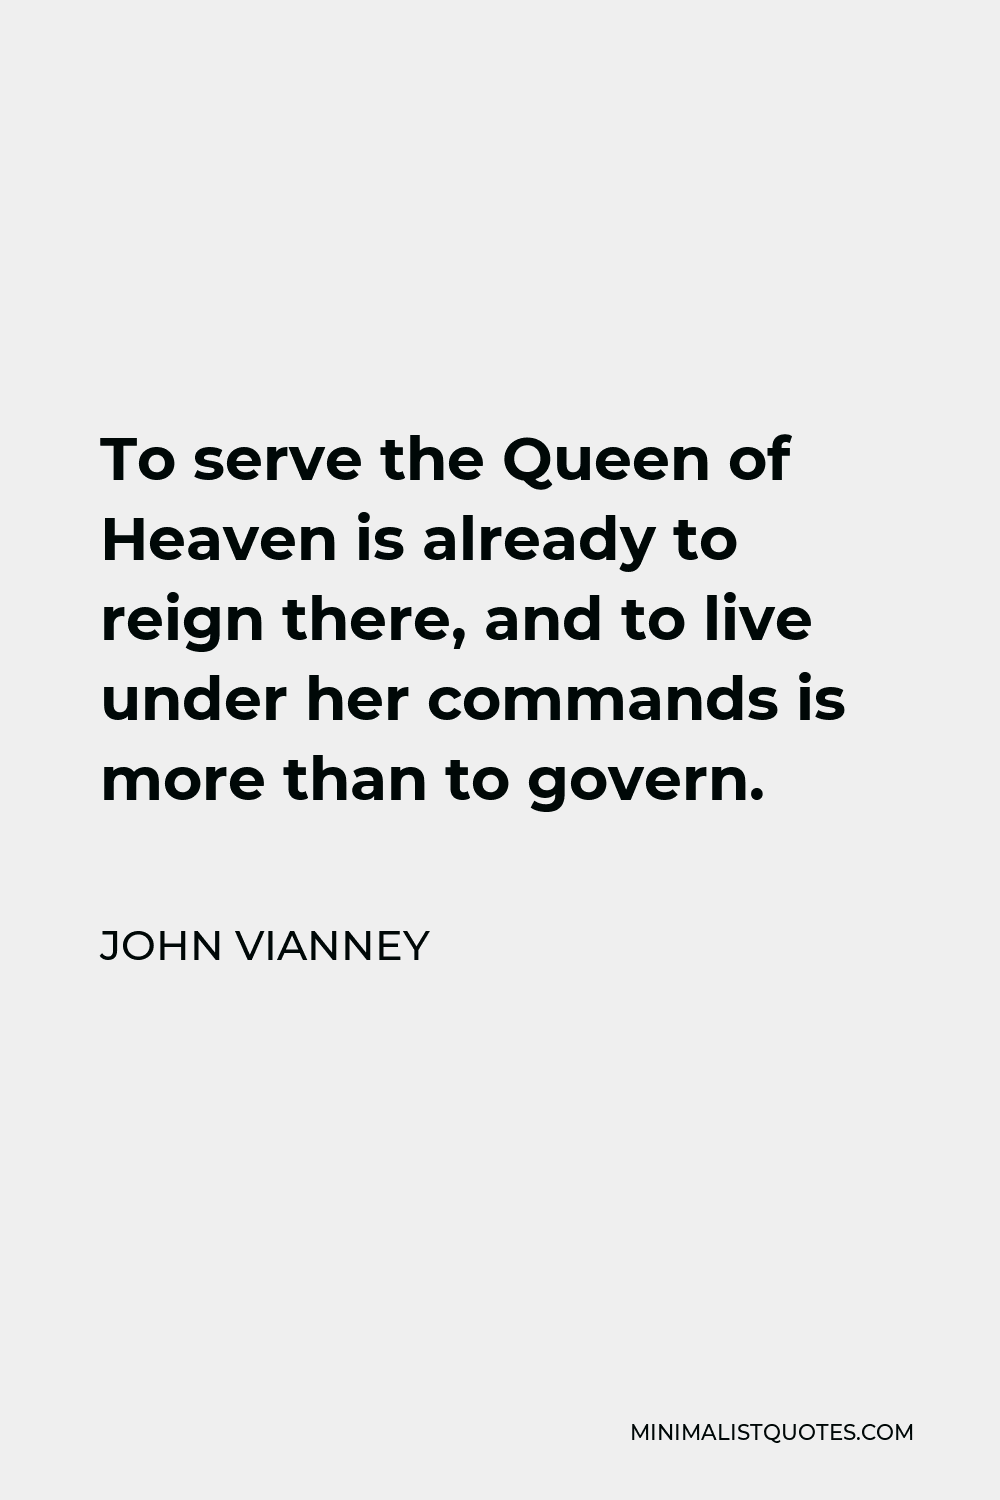 John Vianney Quote - To serve the Queen of Heaven is already to reign there, and to live under her commands is more than to govern.